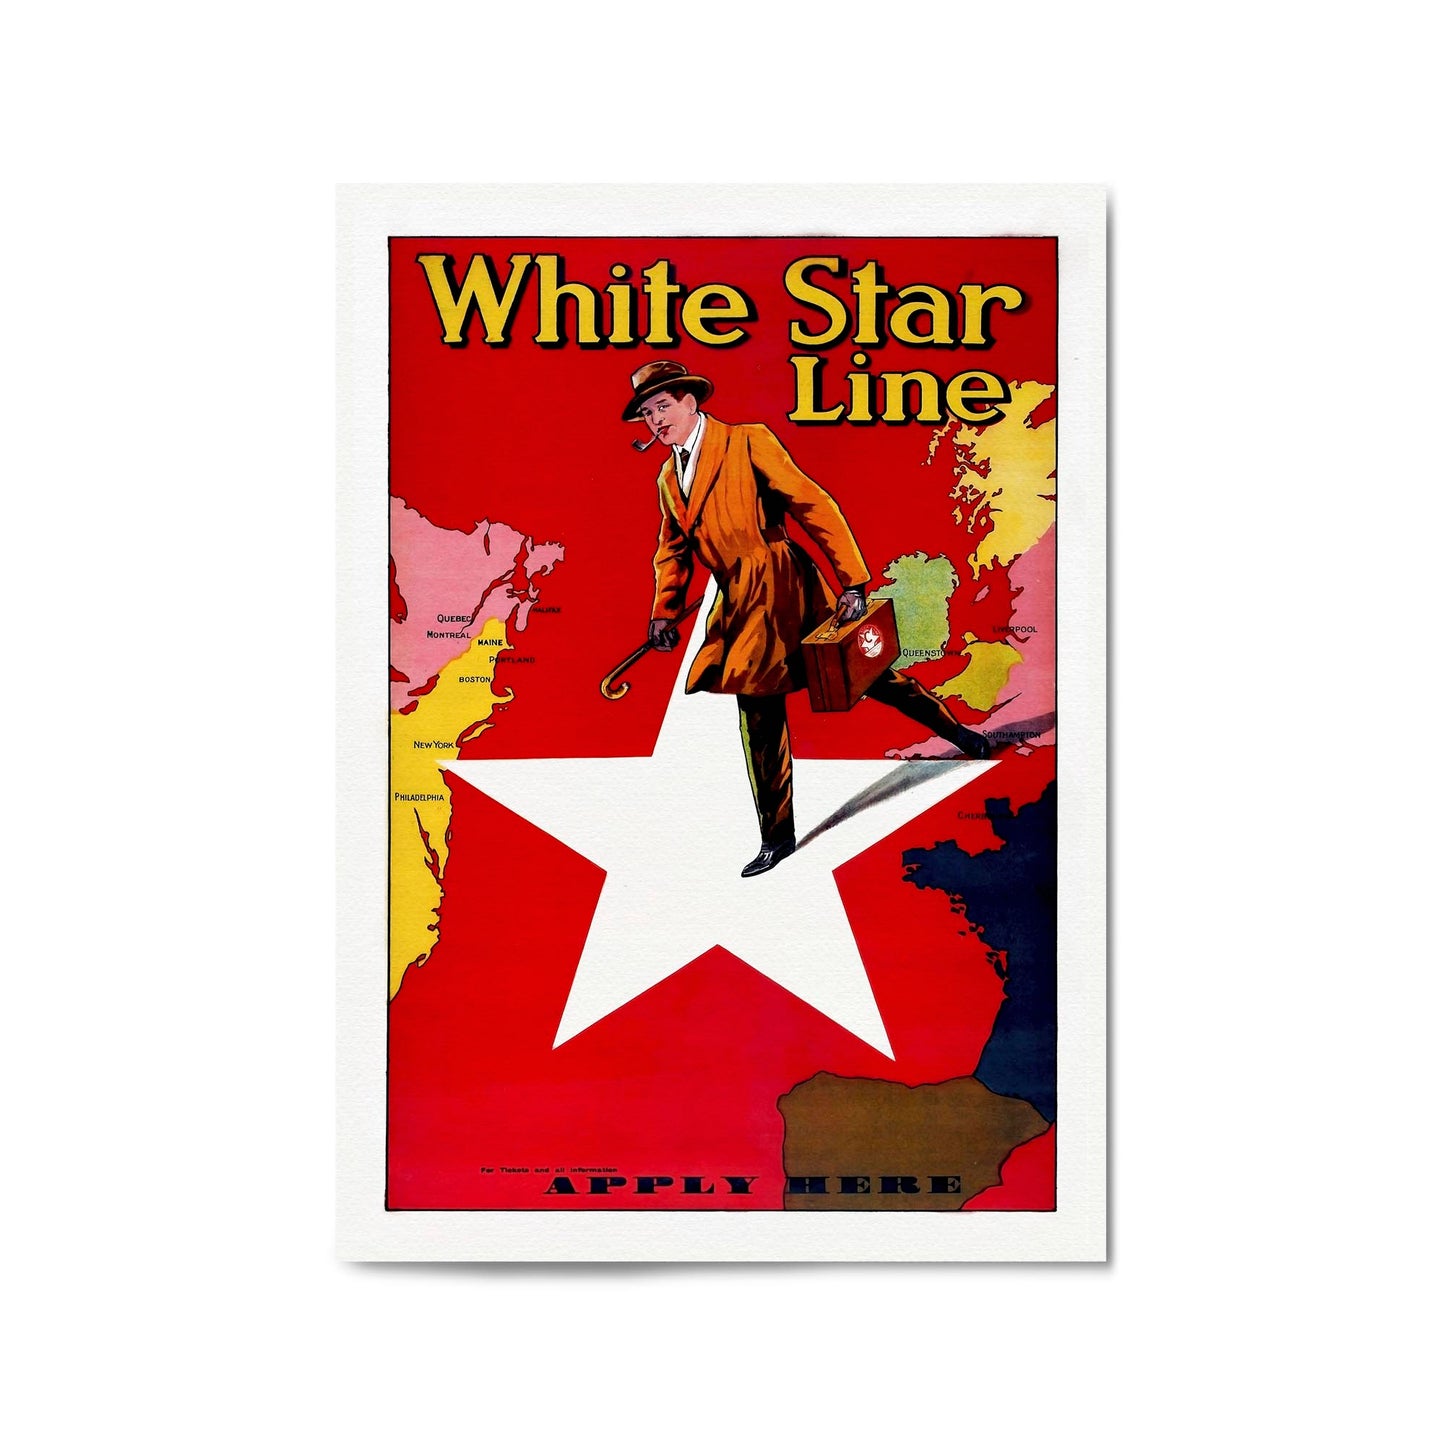 White Star Line Vintage Shipping Advert Wall Art #4 - The Affordable Art Company